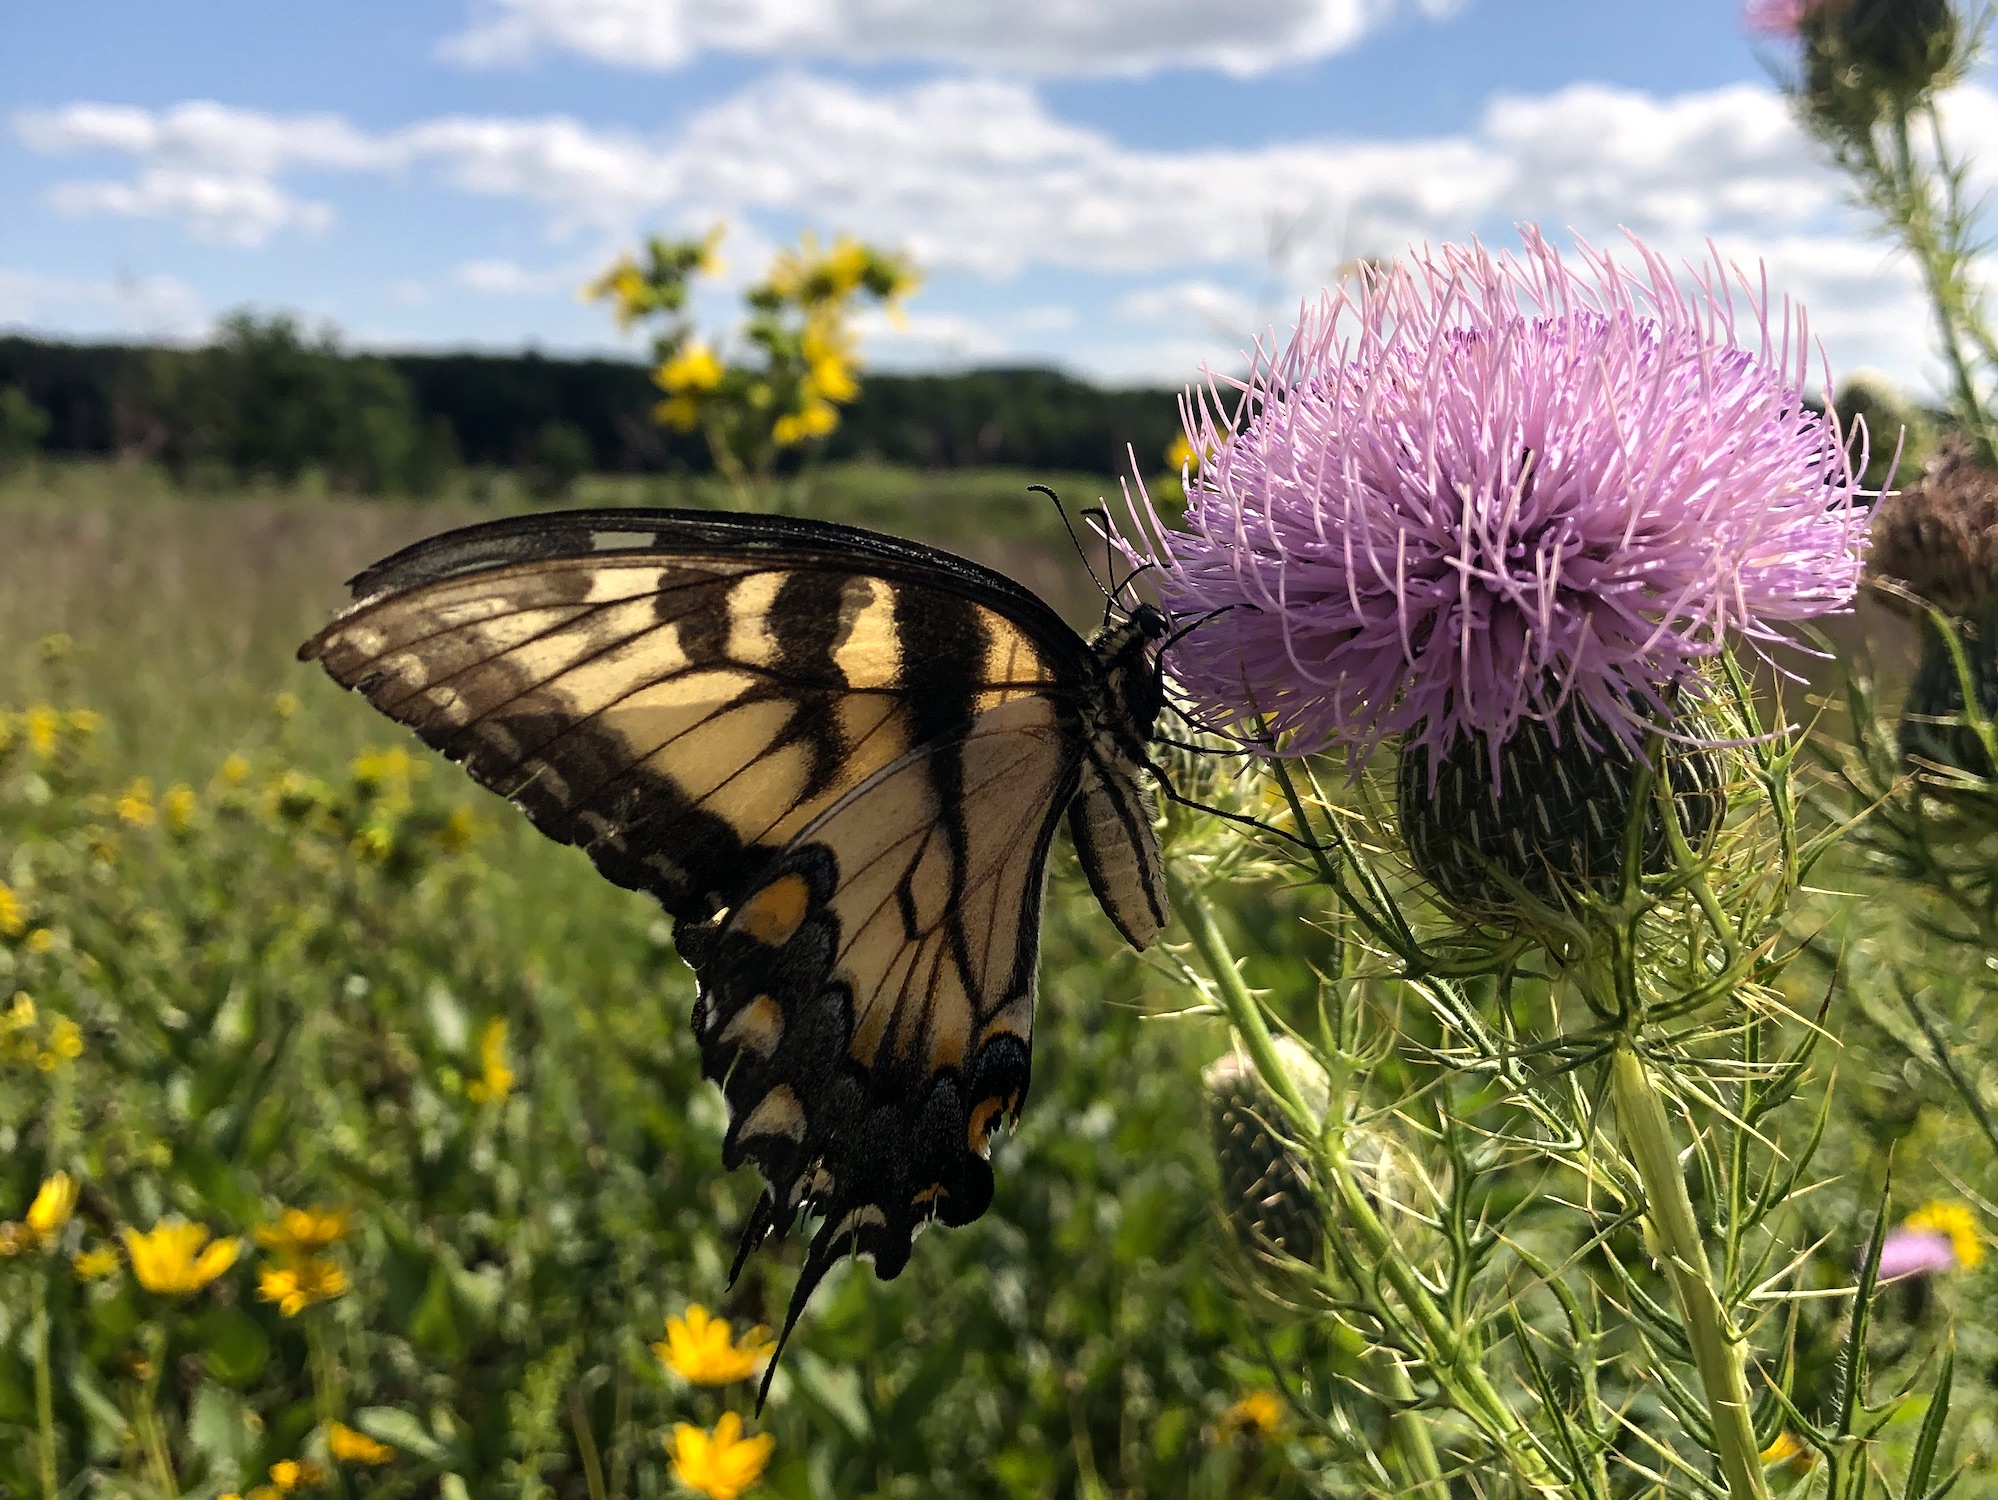 Male Eastern Tiger Swallowtail butterfly on Field Thistle in UW Arboretum Curtis Prairie in Madison, Wisconsin on August 22, 2022.